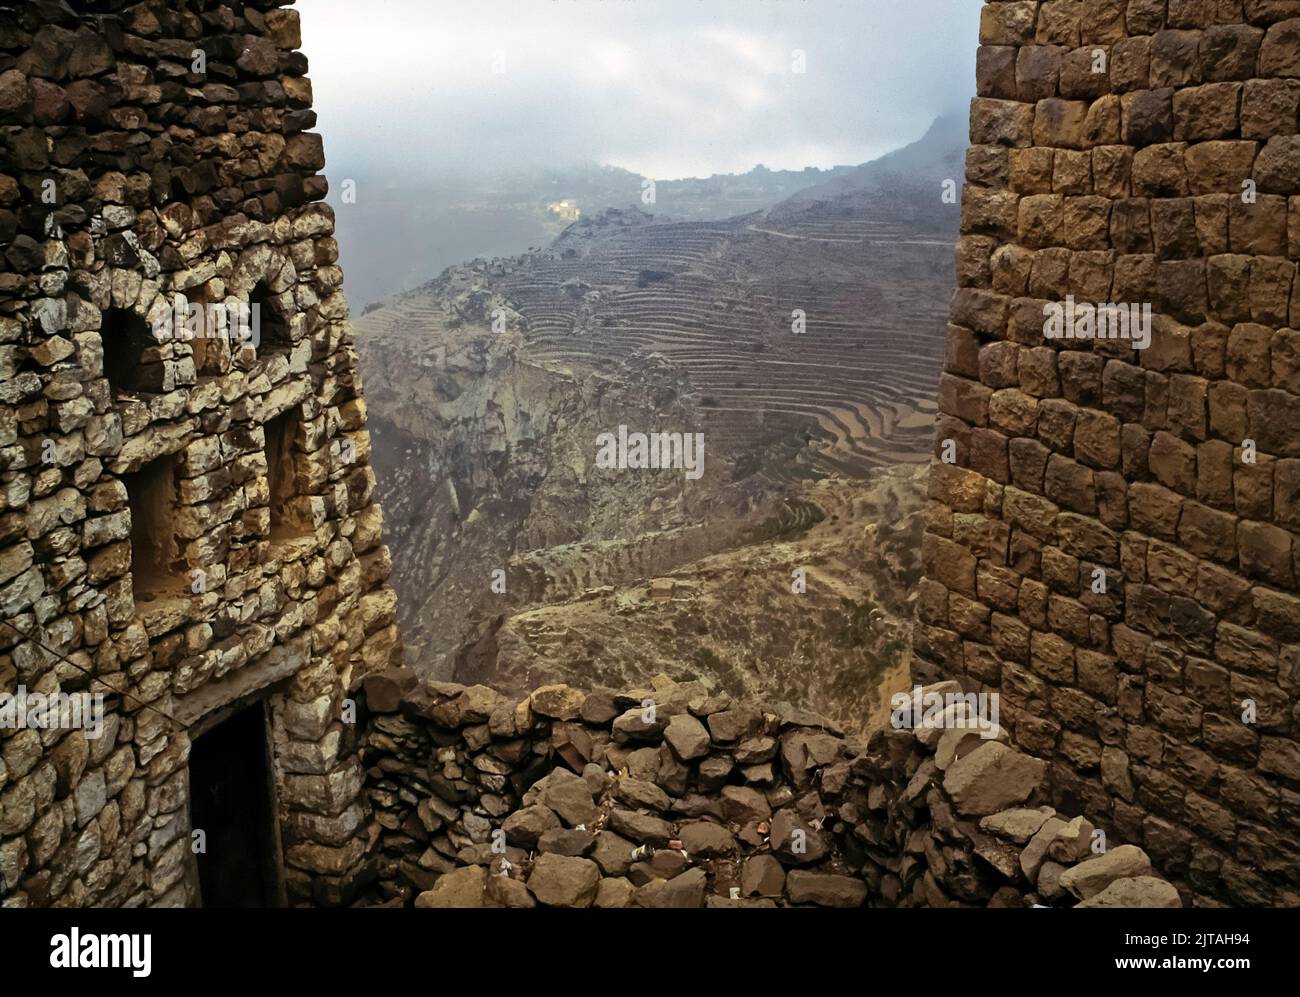 The town of al-Hajjarah is located in the Haraz Mountains of Yemen. Hajjarah was originally constructed as a safe house for dignitaries. Stock Photo